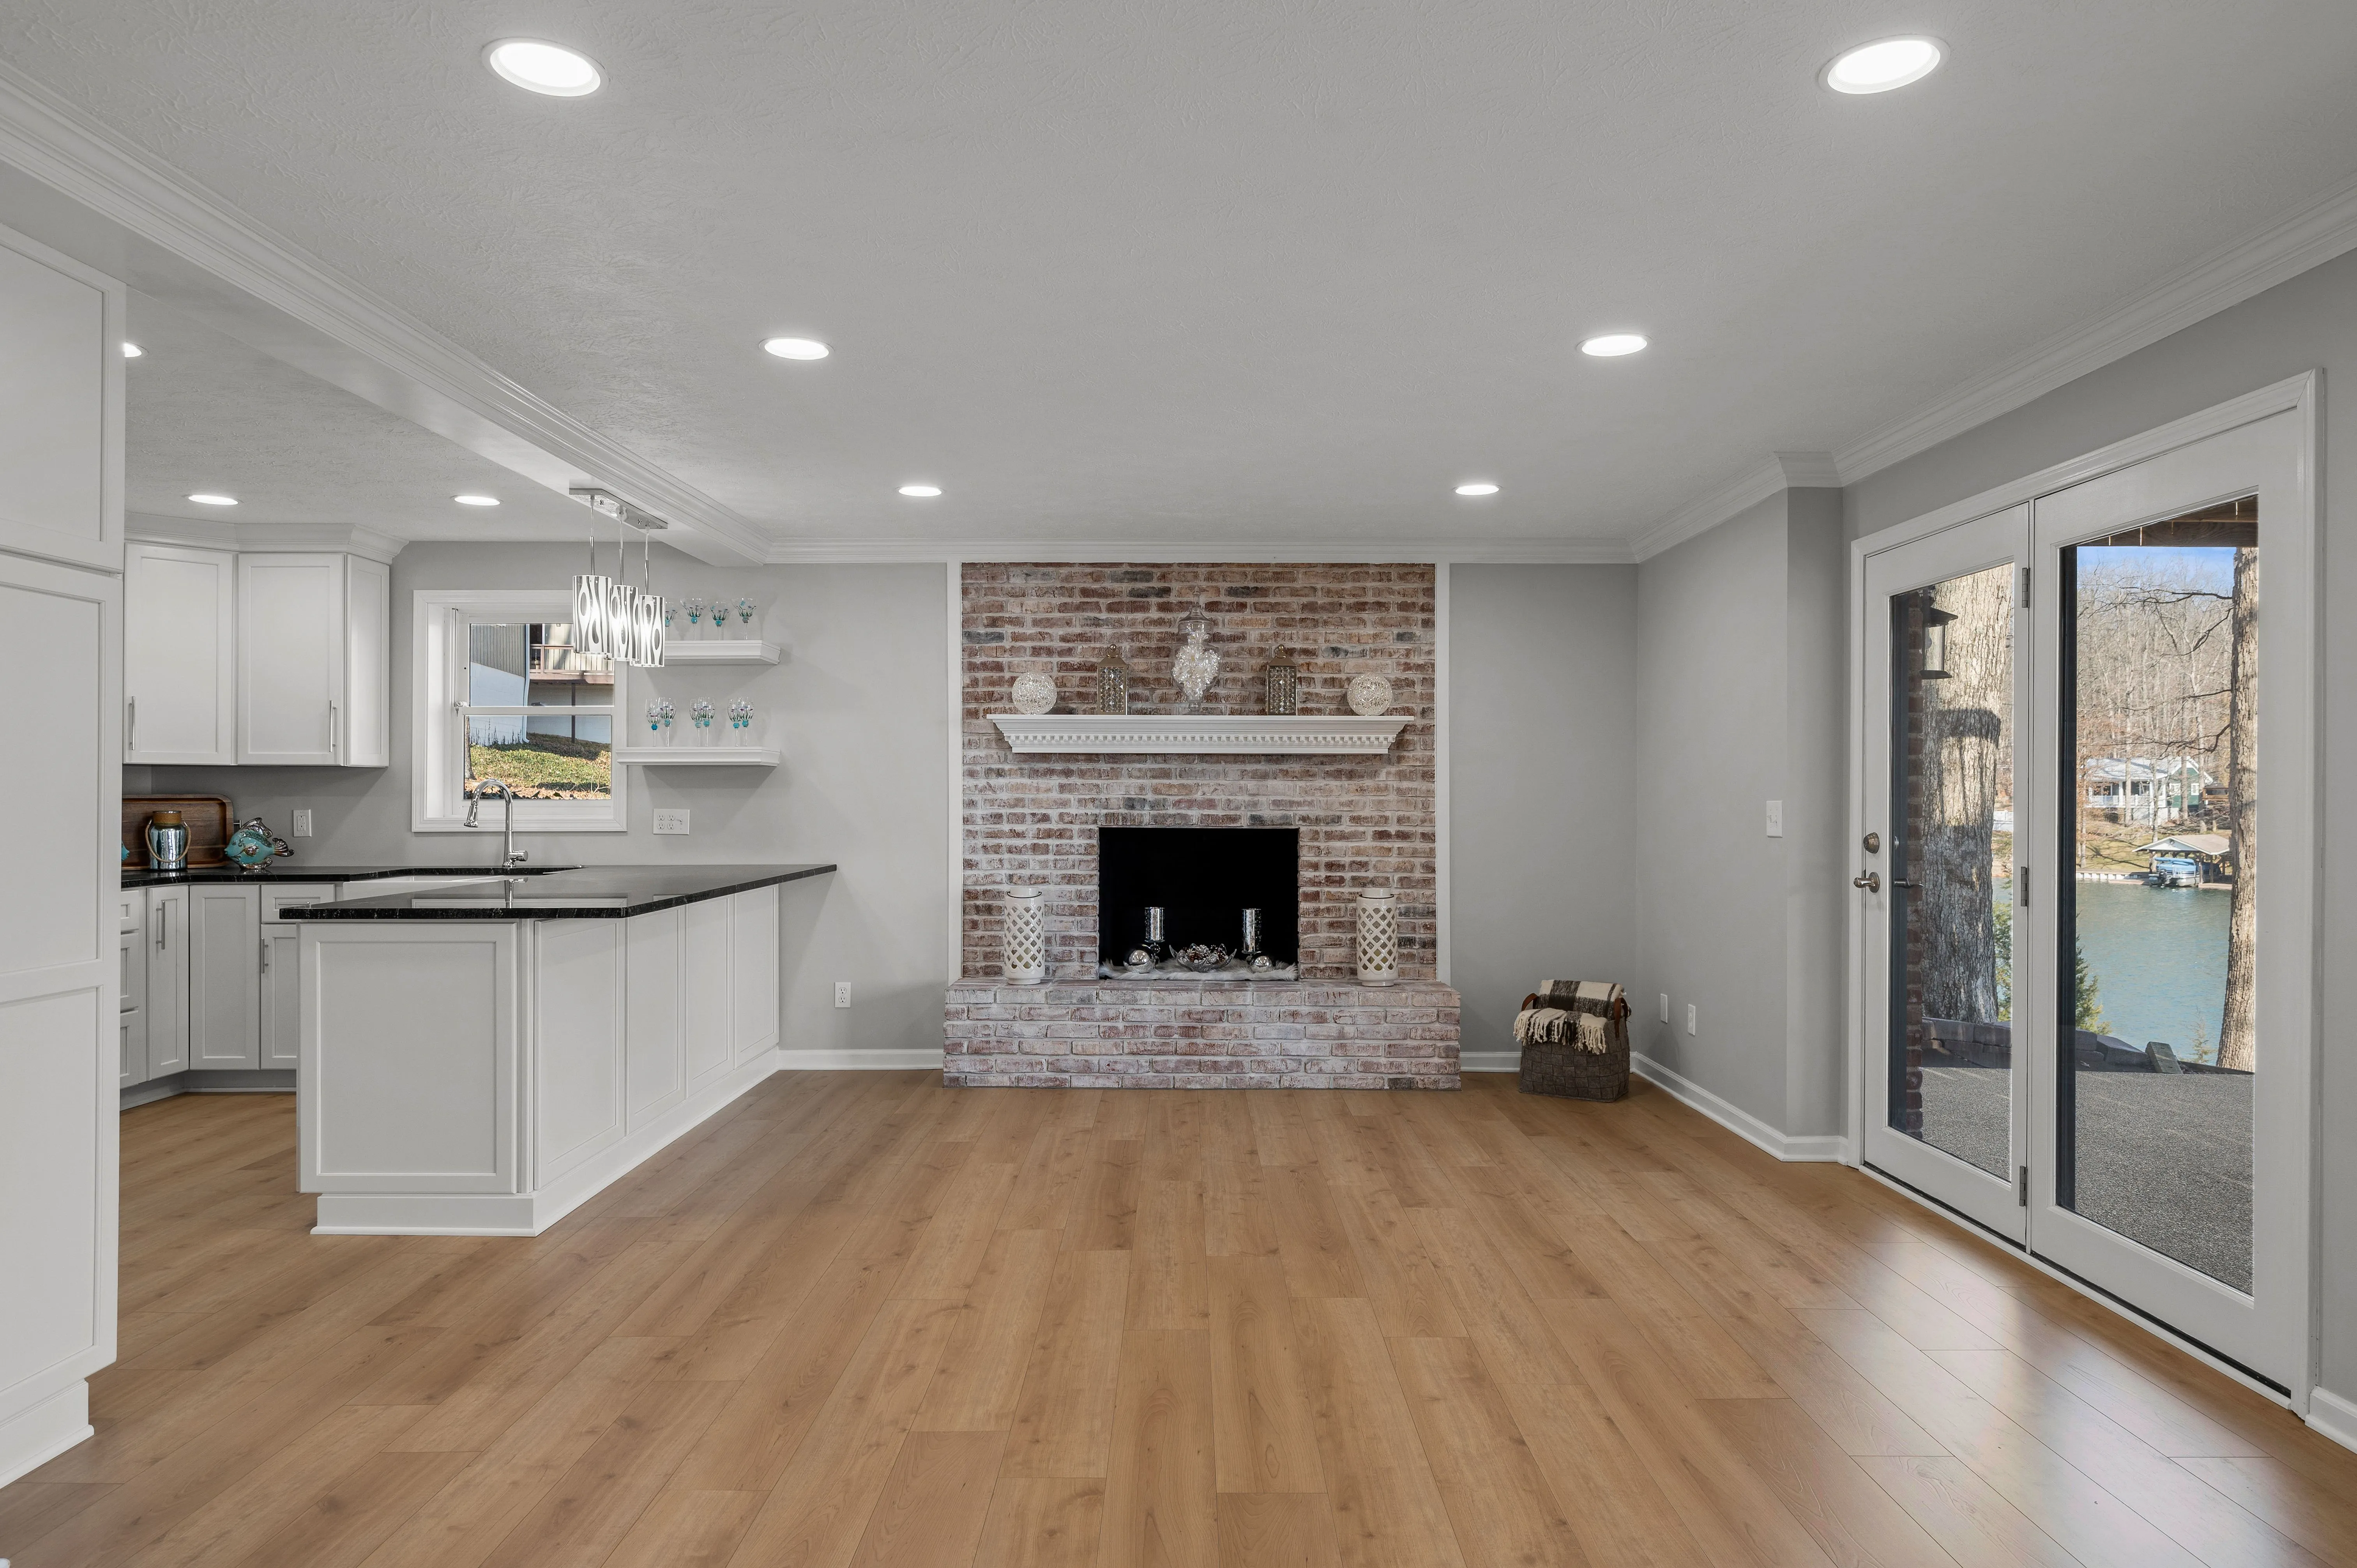 Modern open concept living space with kitchen, hardwood floors, and brick fireplace.